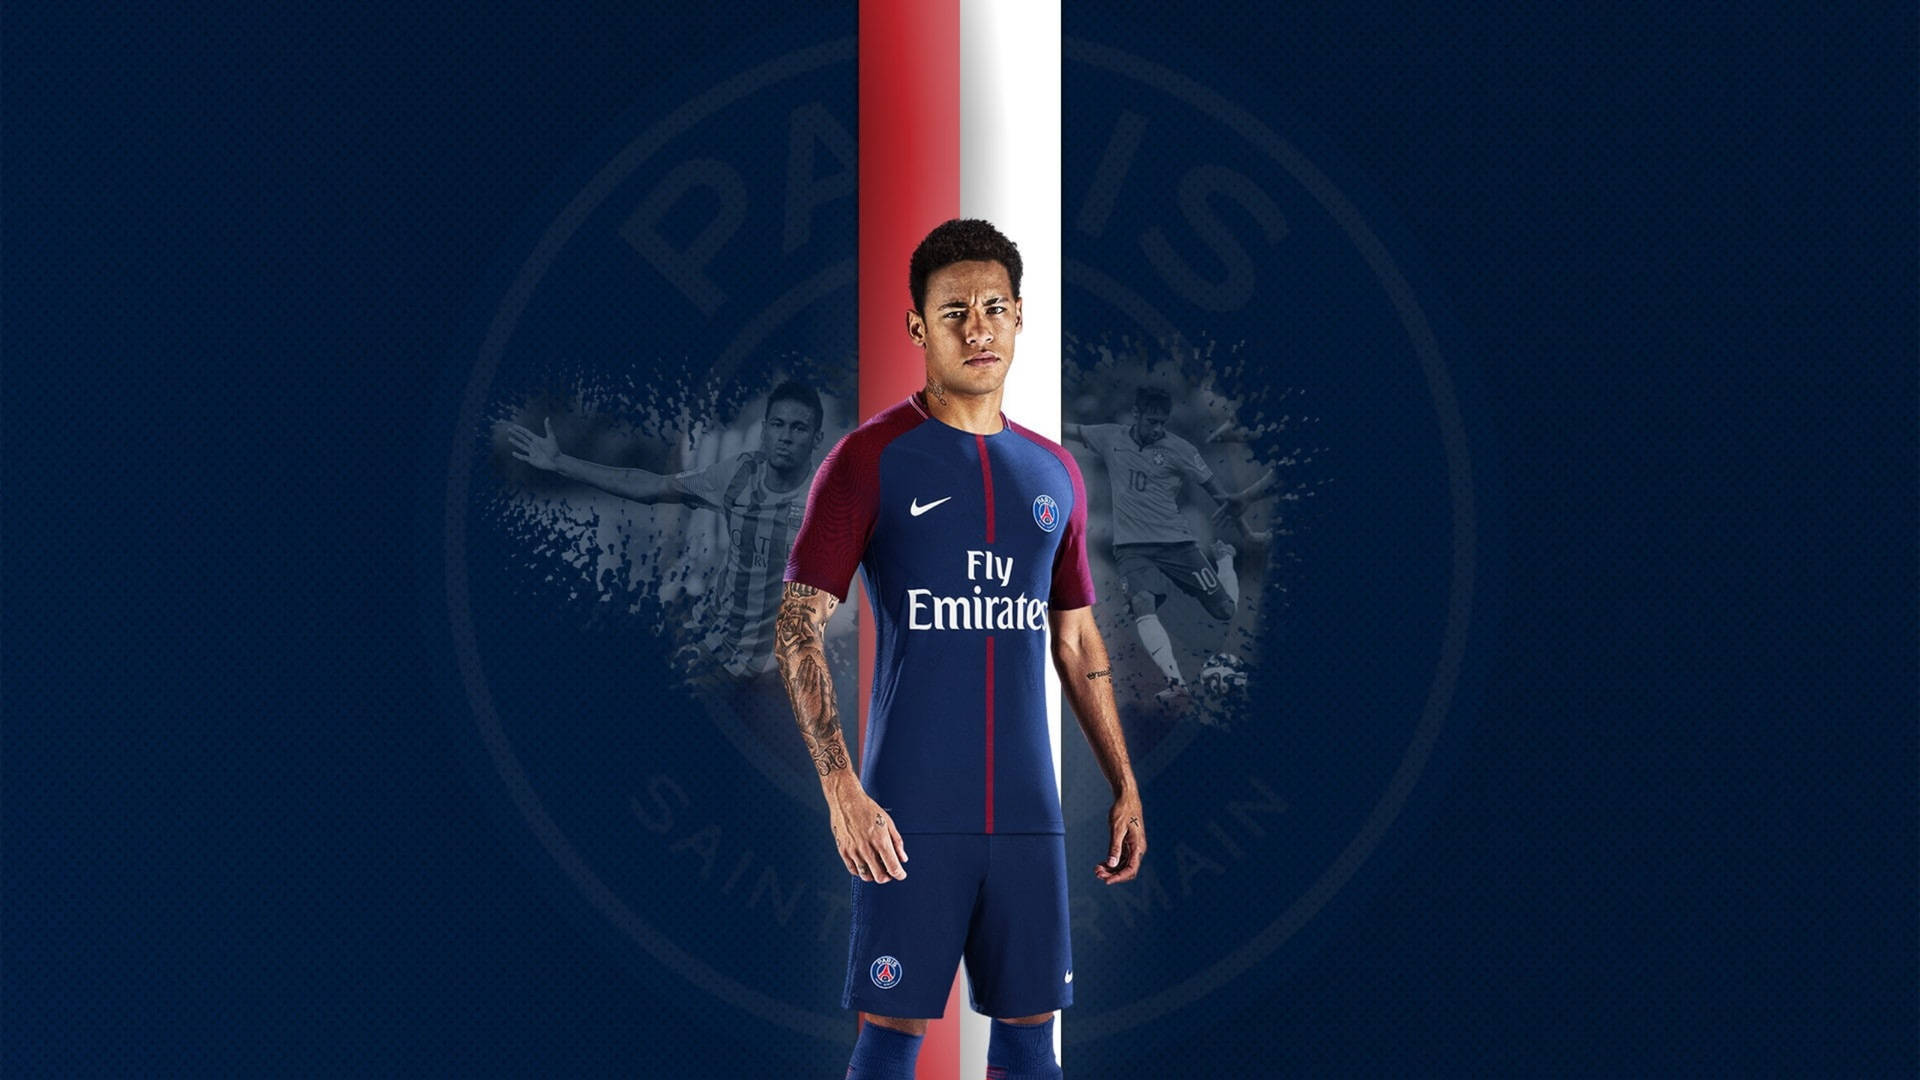 PSG 2560X1440 Wallpaper and Background Image